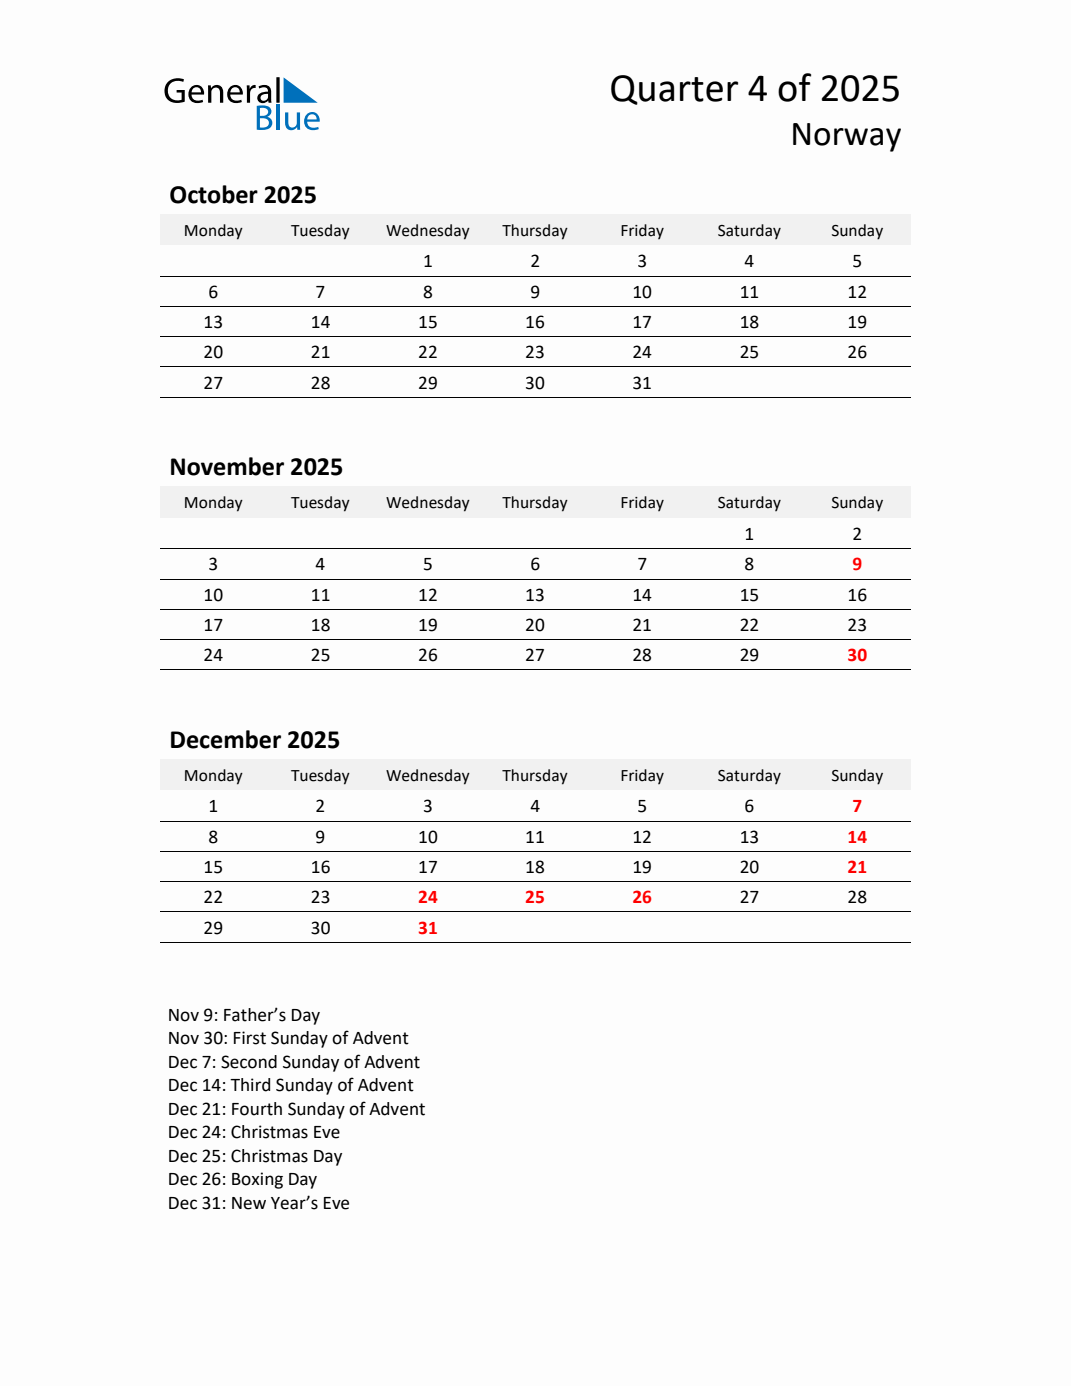 Threemonth calendar for Norway Q4 of 2025